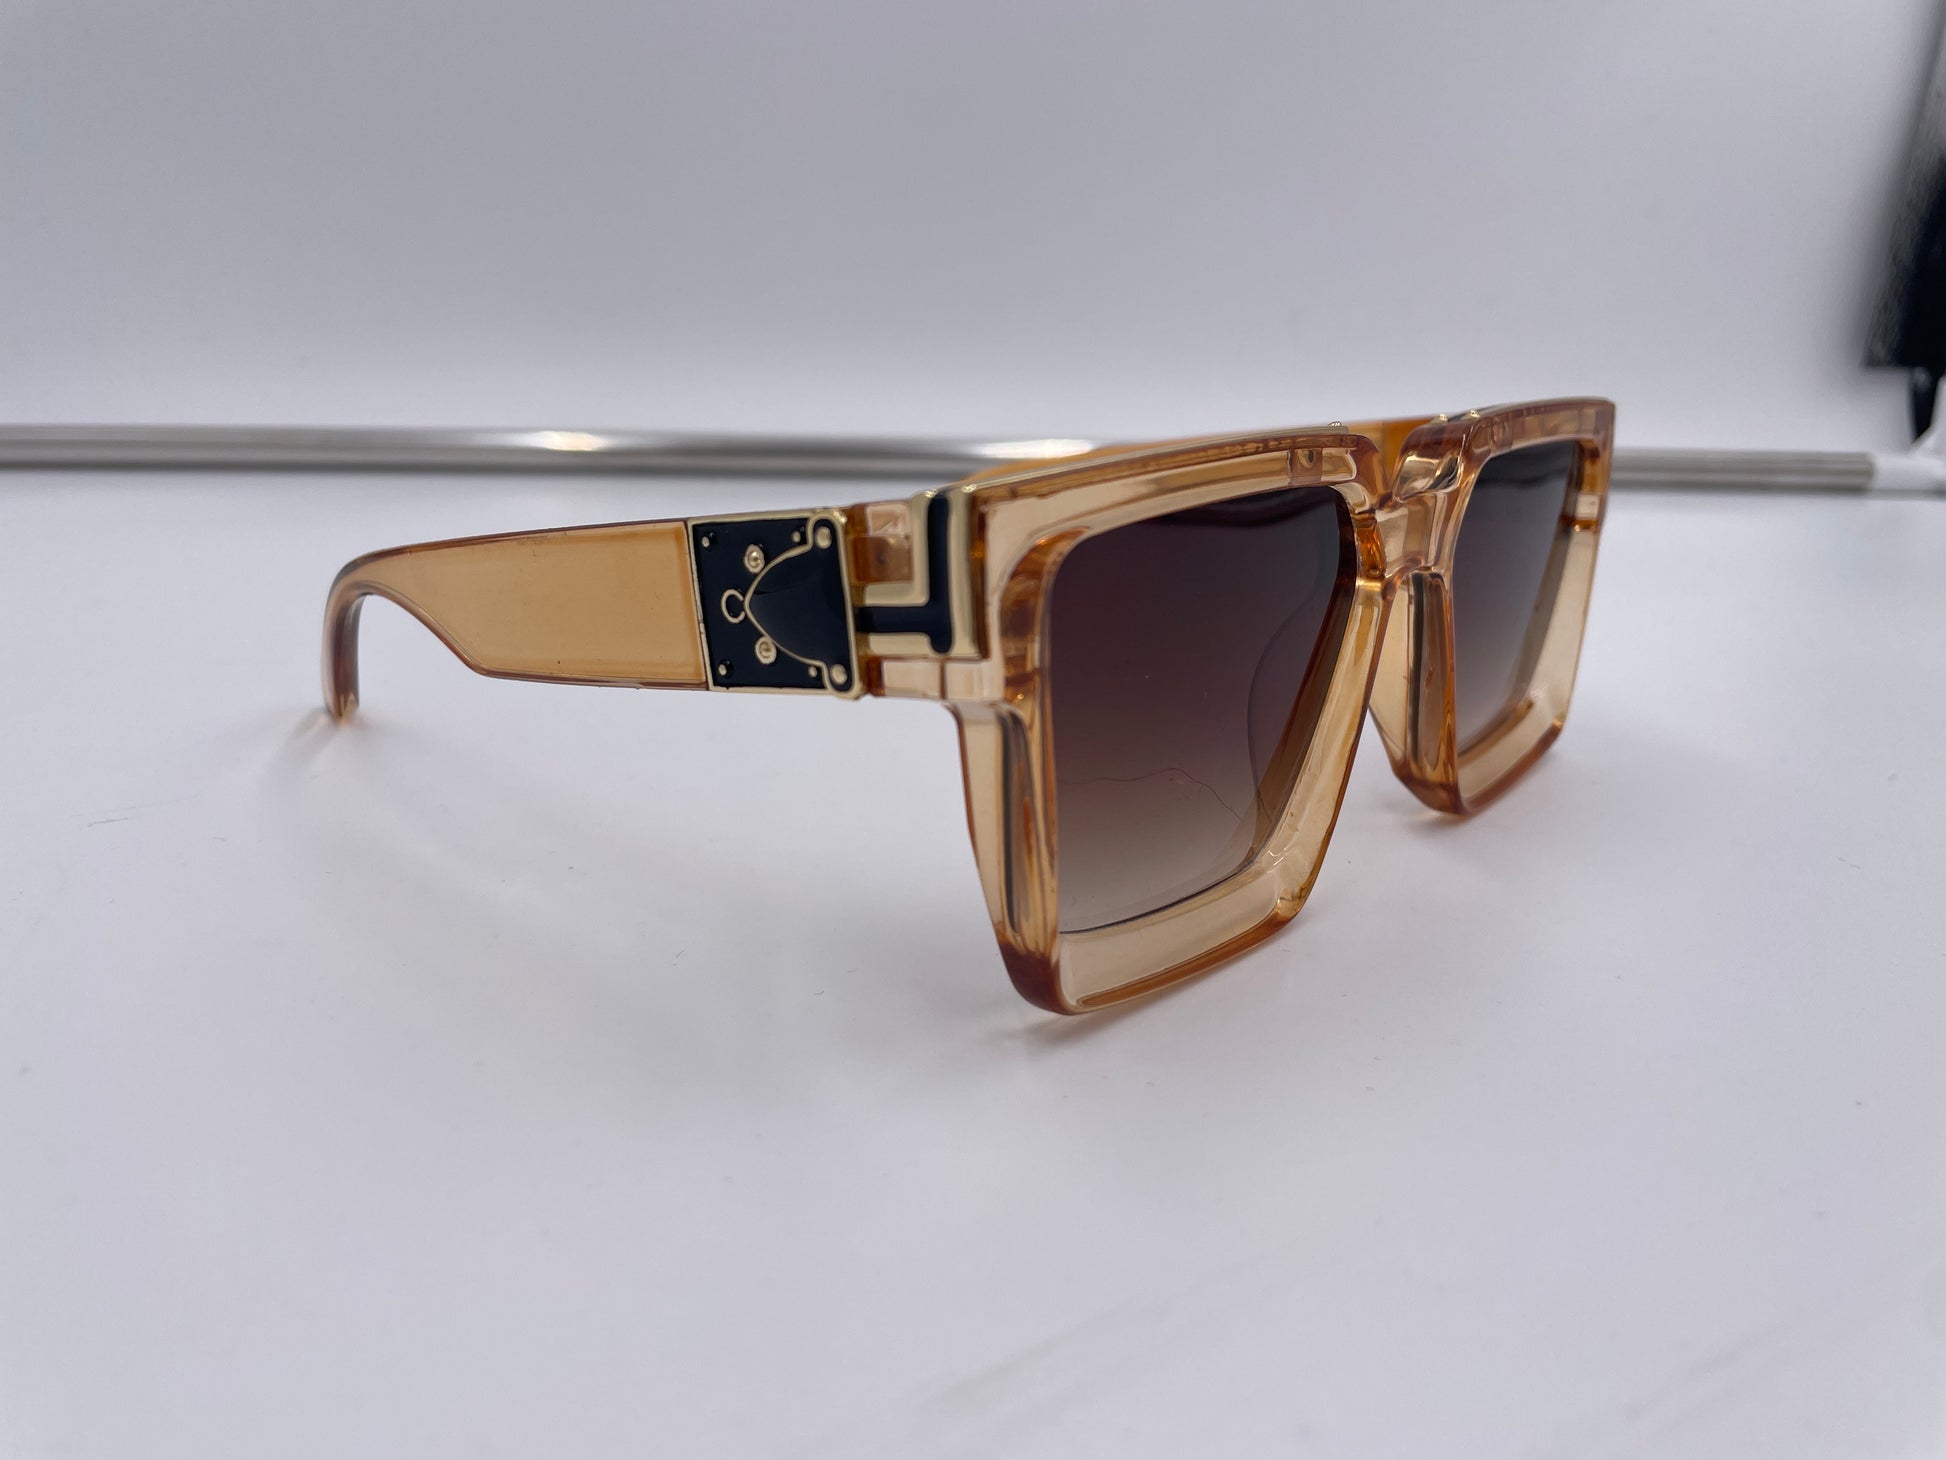 Top Quality Transparent Millionaire Transparent Sunglasses 2021 Latest  1165W Fashion Holiday Square Frame With Original Box S2790 From Wssr55,  $43.75